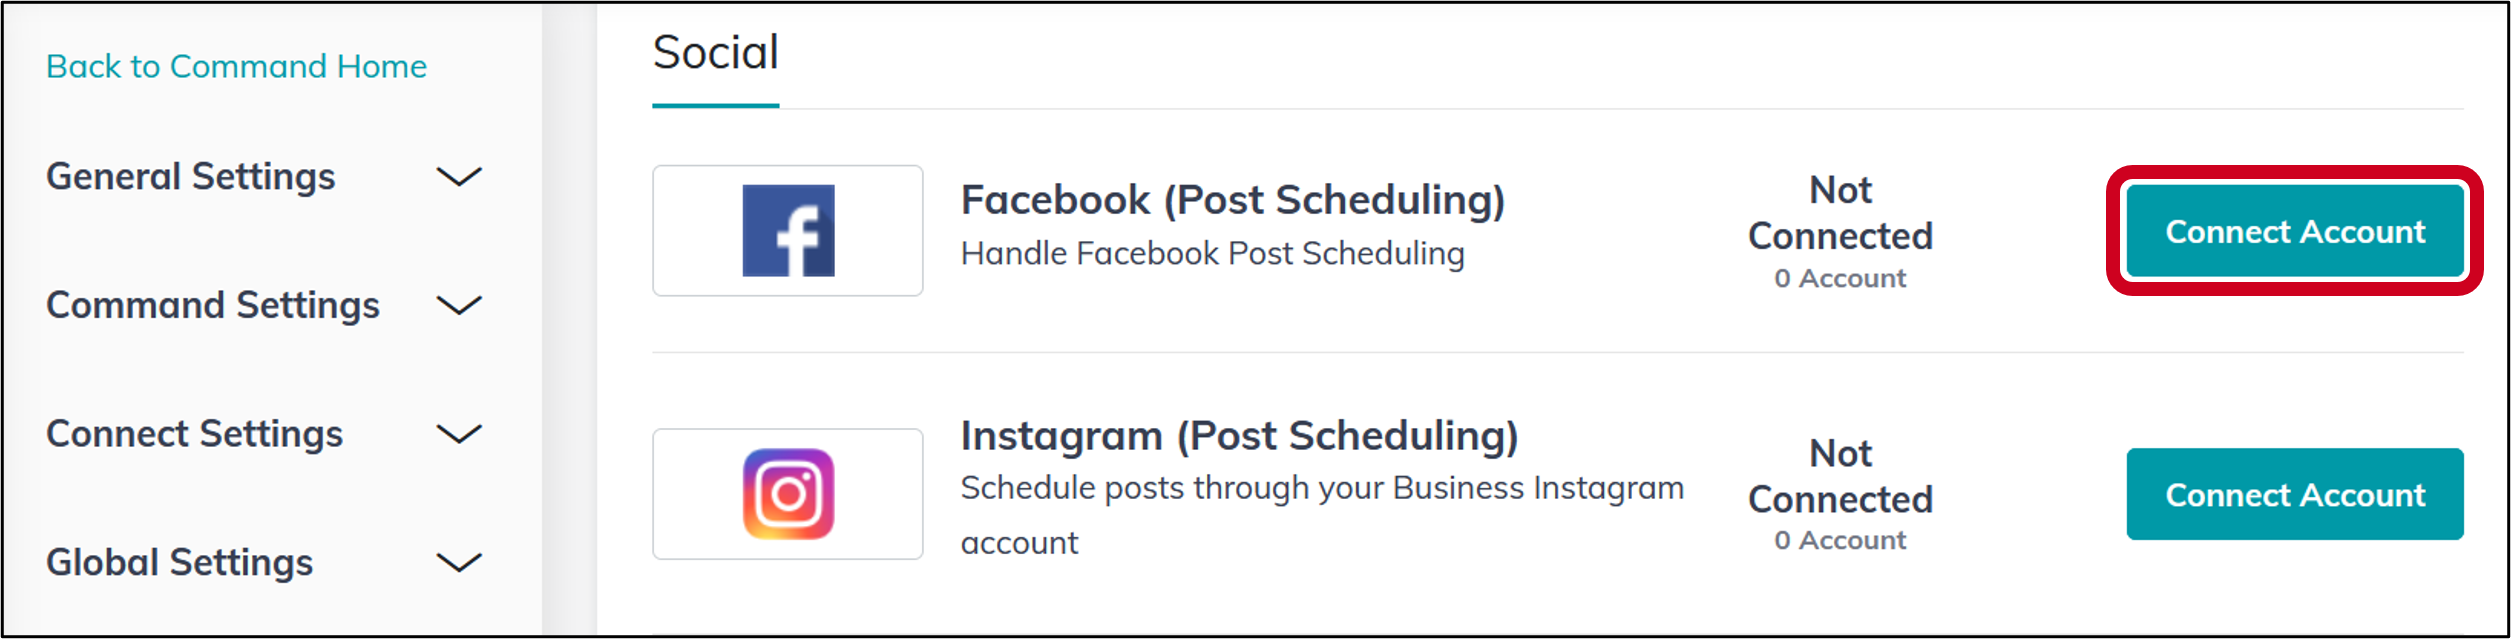 settings fb post connect account.png